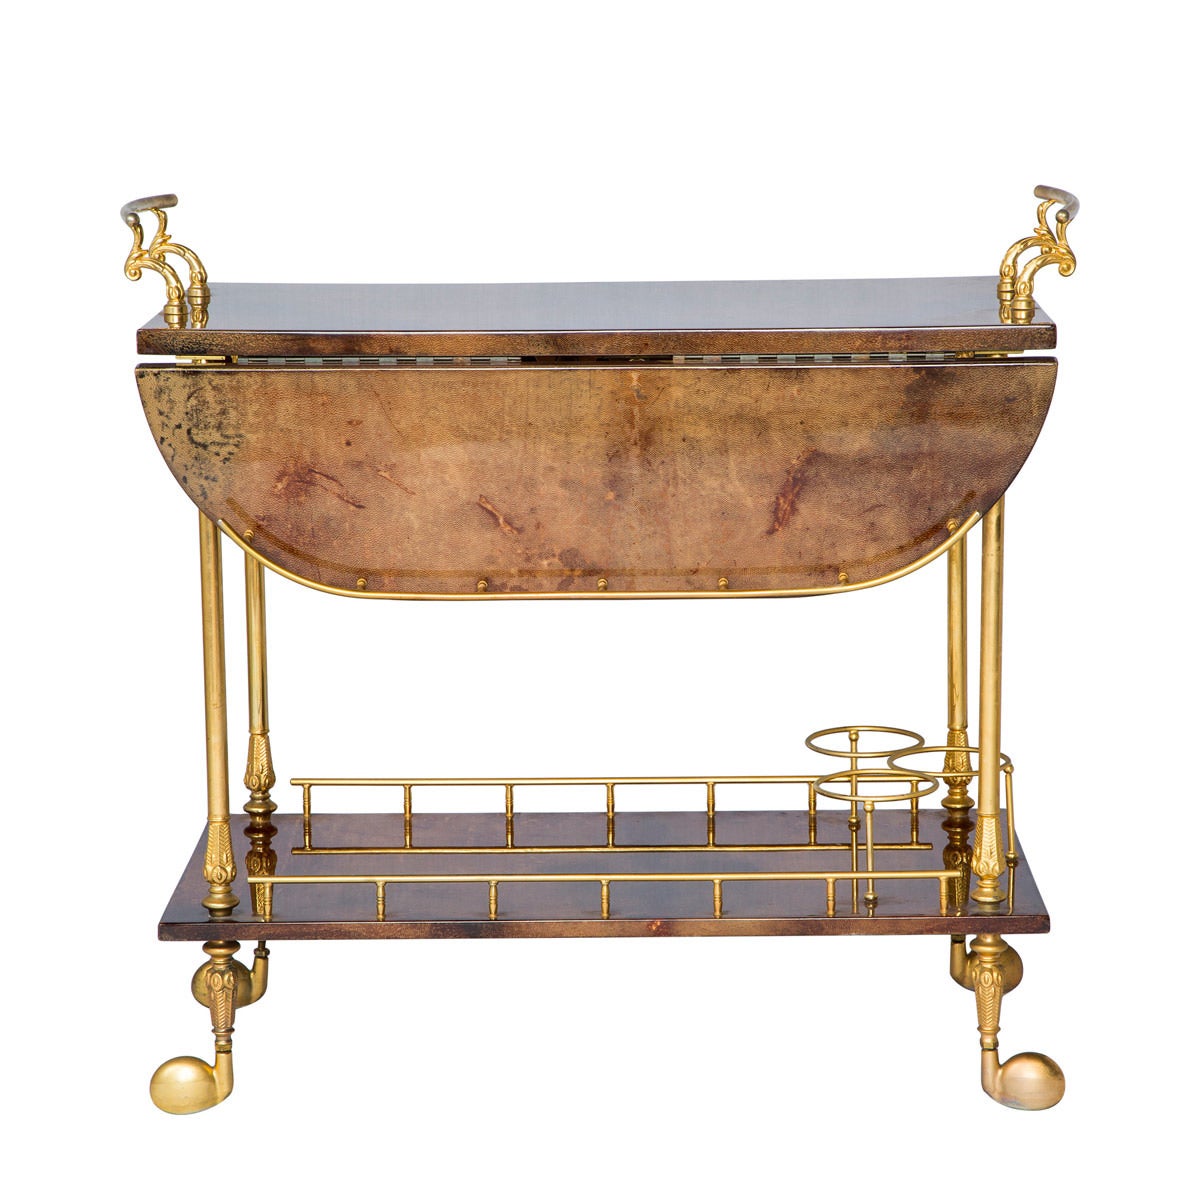 Regency style tea cart by Italian designer Aldo Tura, circa 1950s-1960s with a flare of early 1920s Art Nouveau, this vibrant piece is made from lacquered goatskin and brass structural features. The bottom shelf has three bottle holders. In great